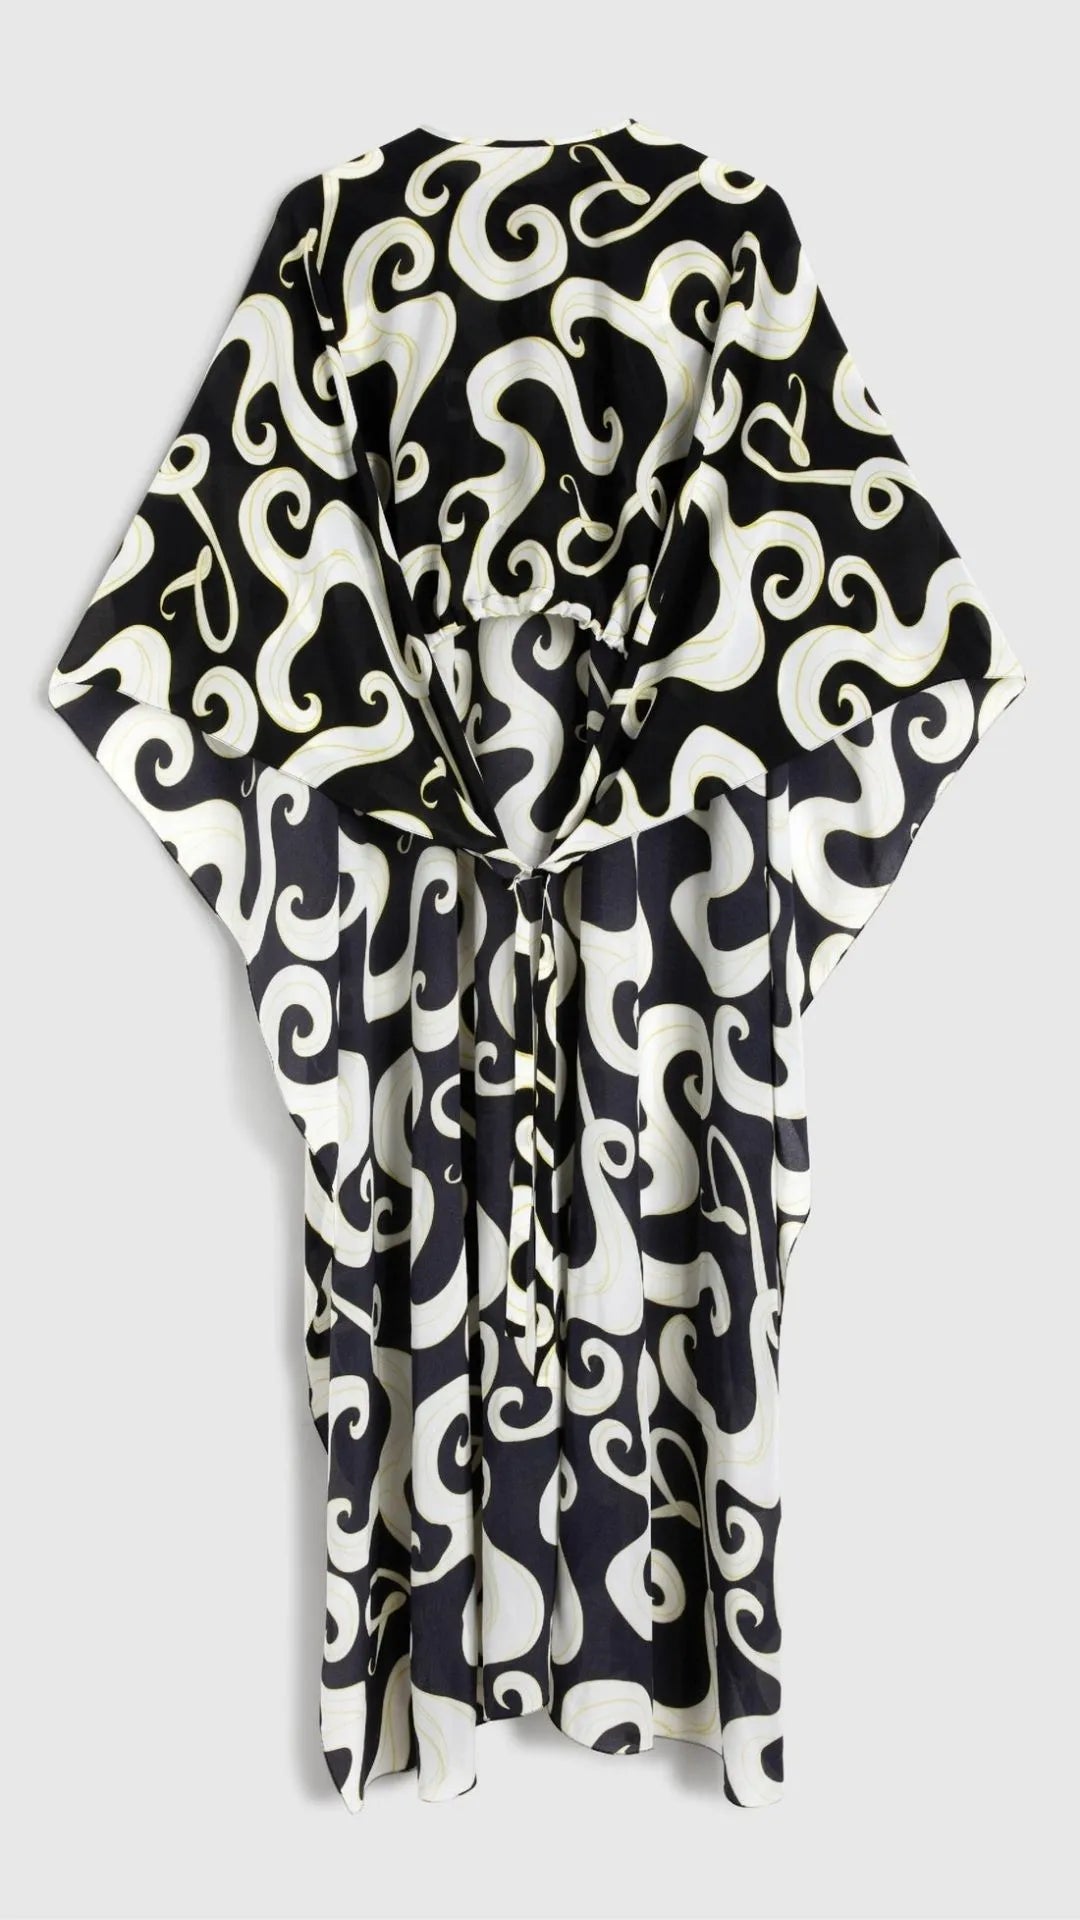 Rochas Paris Fashion Asymmetrical Fluid Top. With a waist length front and a dramatic caped back. Crafted in crepe de chine in a black and white pattern with yellow highlights. This photo is a product shot facing the front.